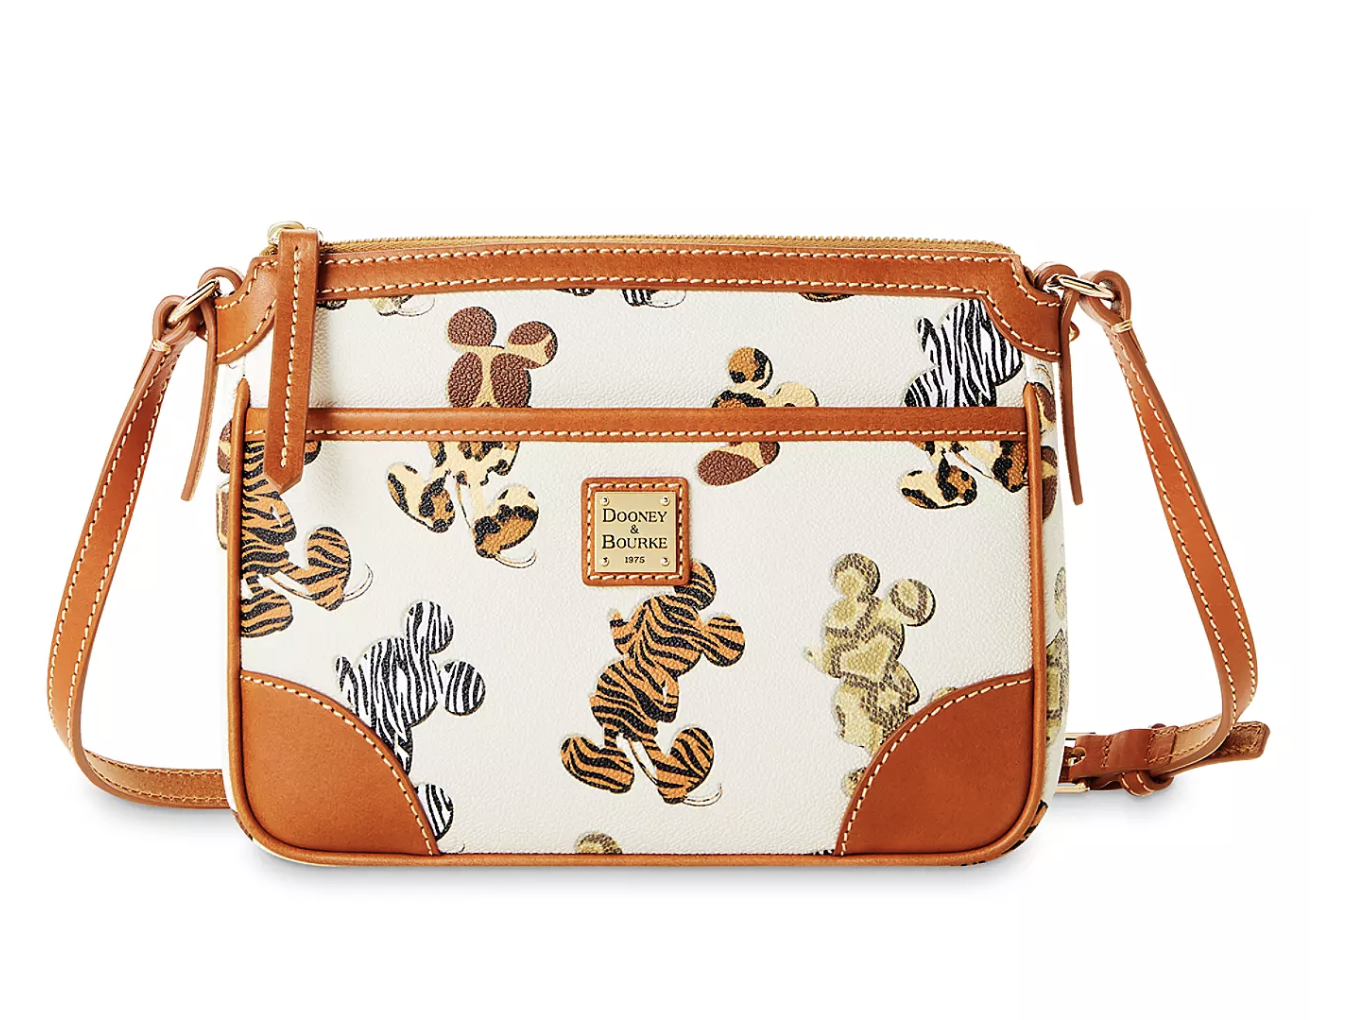 Hurry! Disney's Animal Print Dooney & Bourke Collection is Available ...